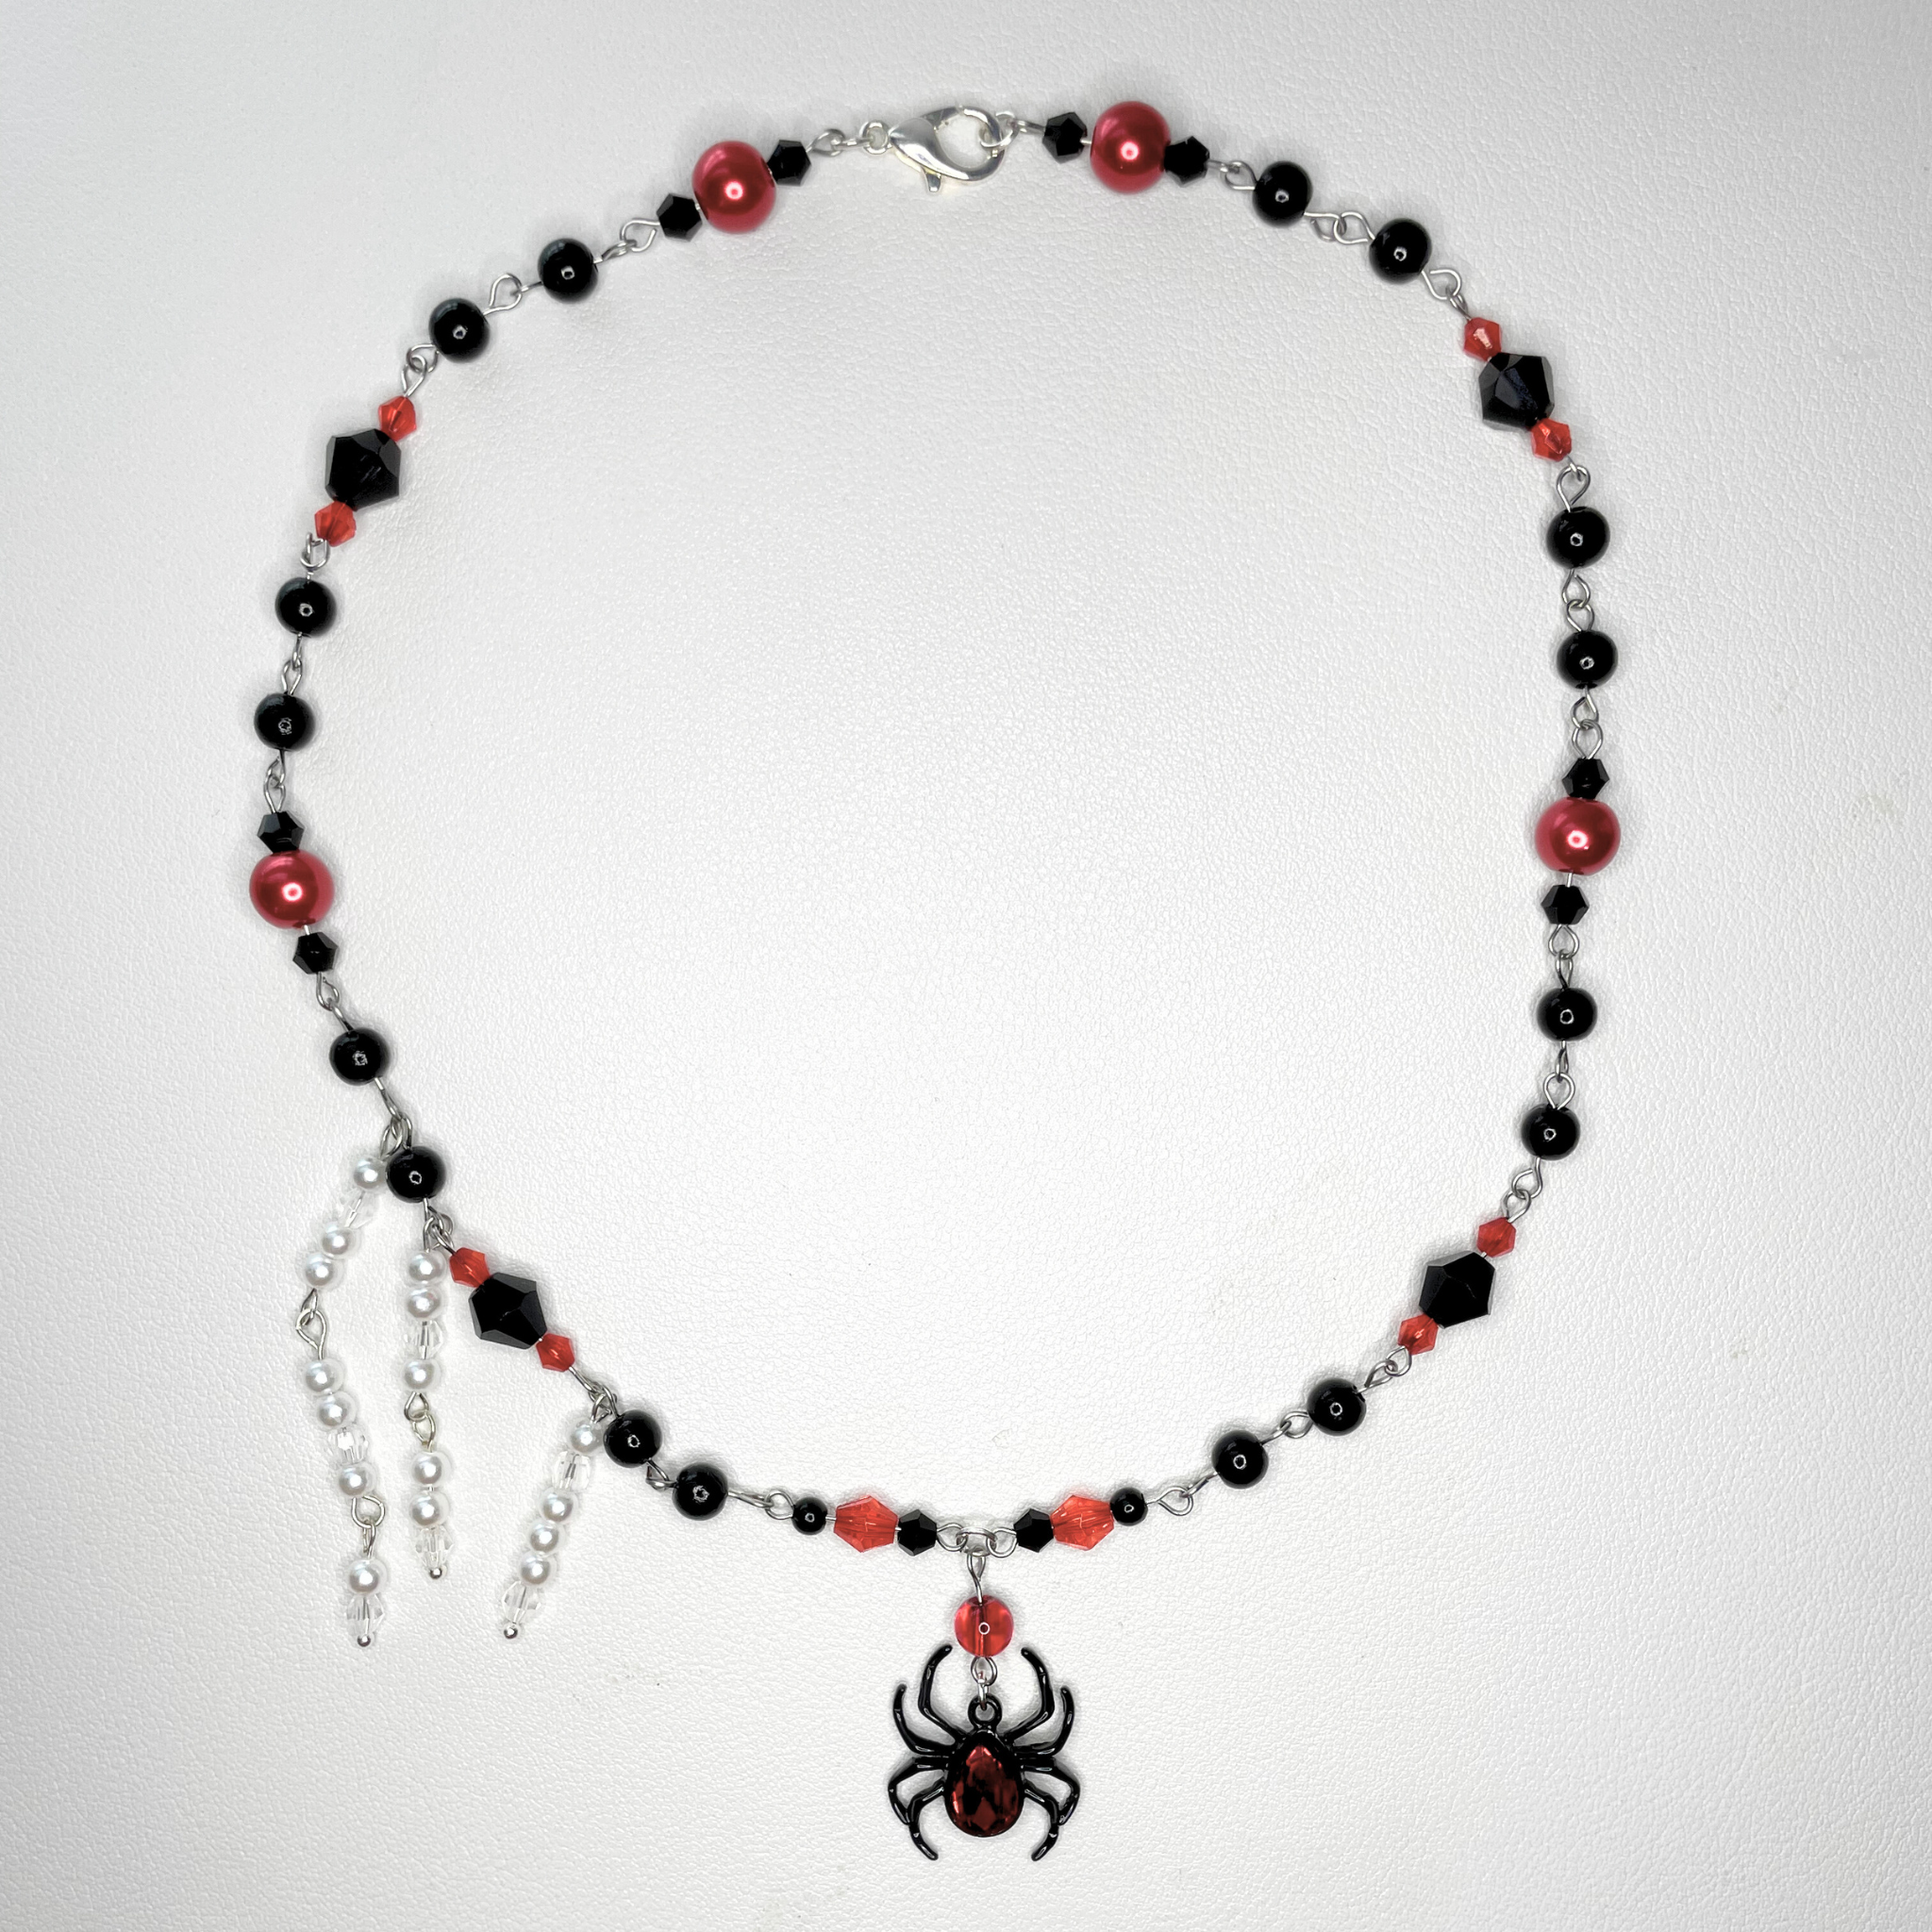 BLACK WIDOW SPIDER LARIAT NECKLACE - Avengers Officially Licensed Marvel's  Movie Black Widow Logo Pendant NECKLACE : Amazon.co.uk: Fashion